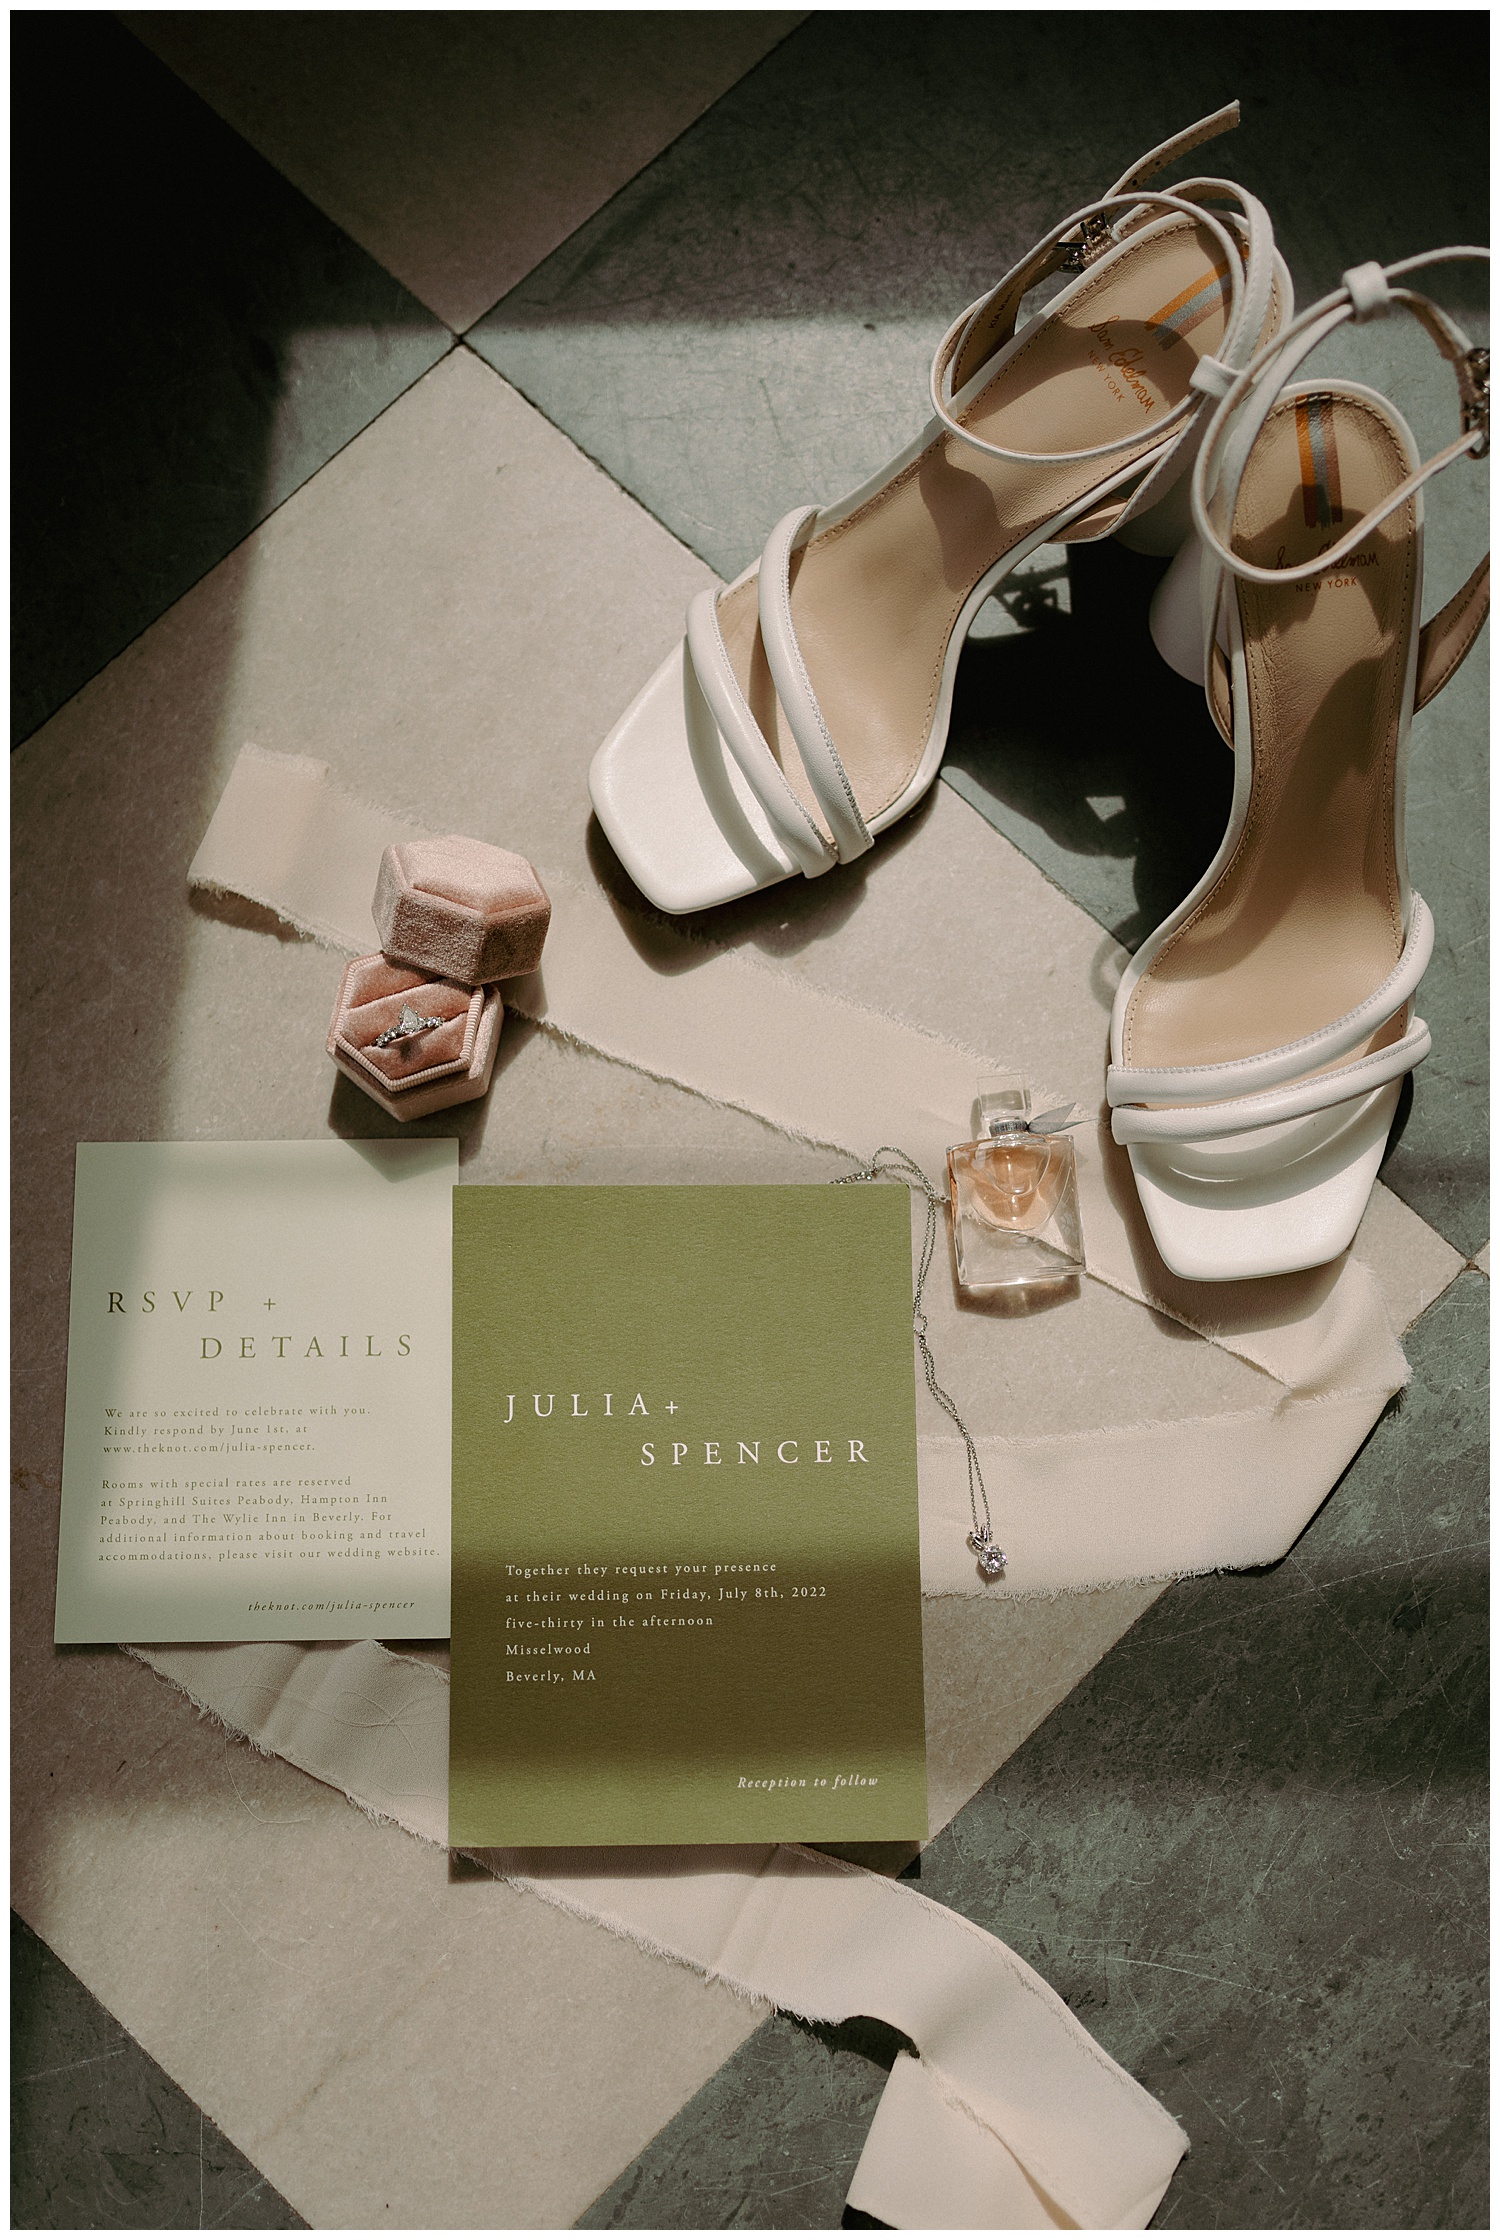 Romantic Wedding Day Details including bride's shoes, perfume, wedding invites